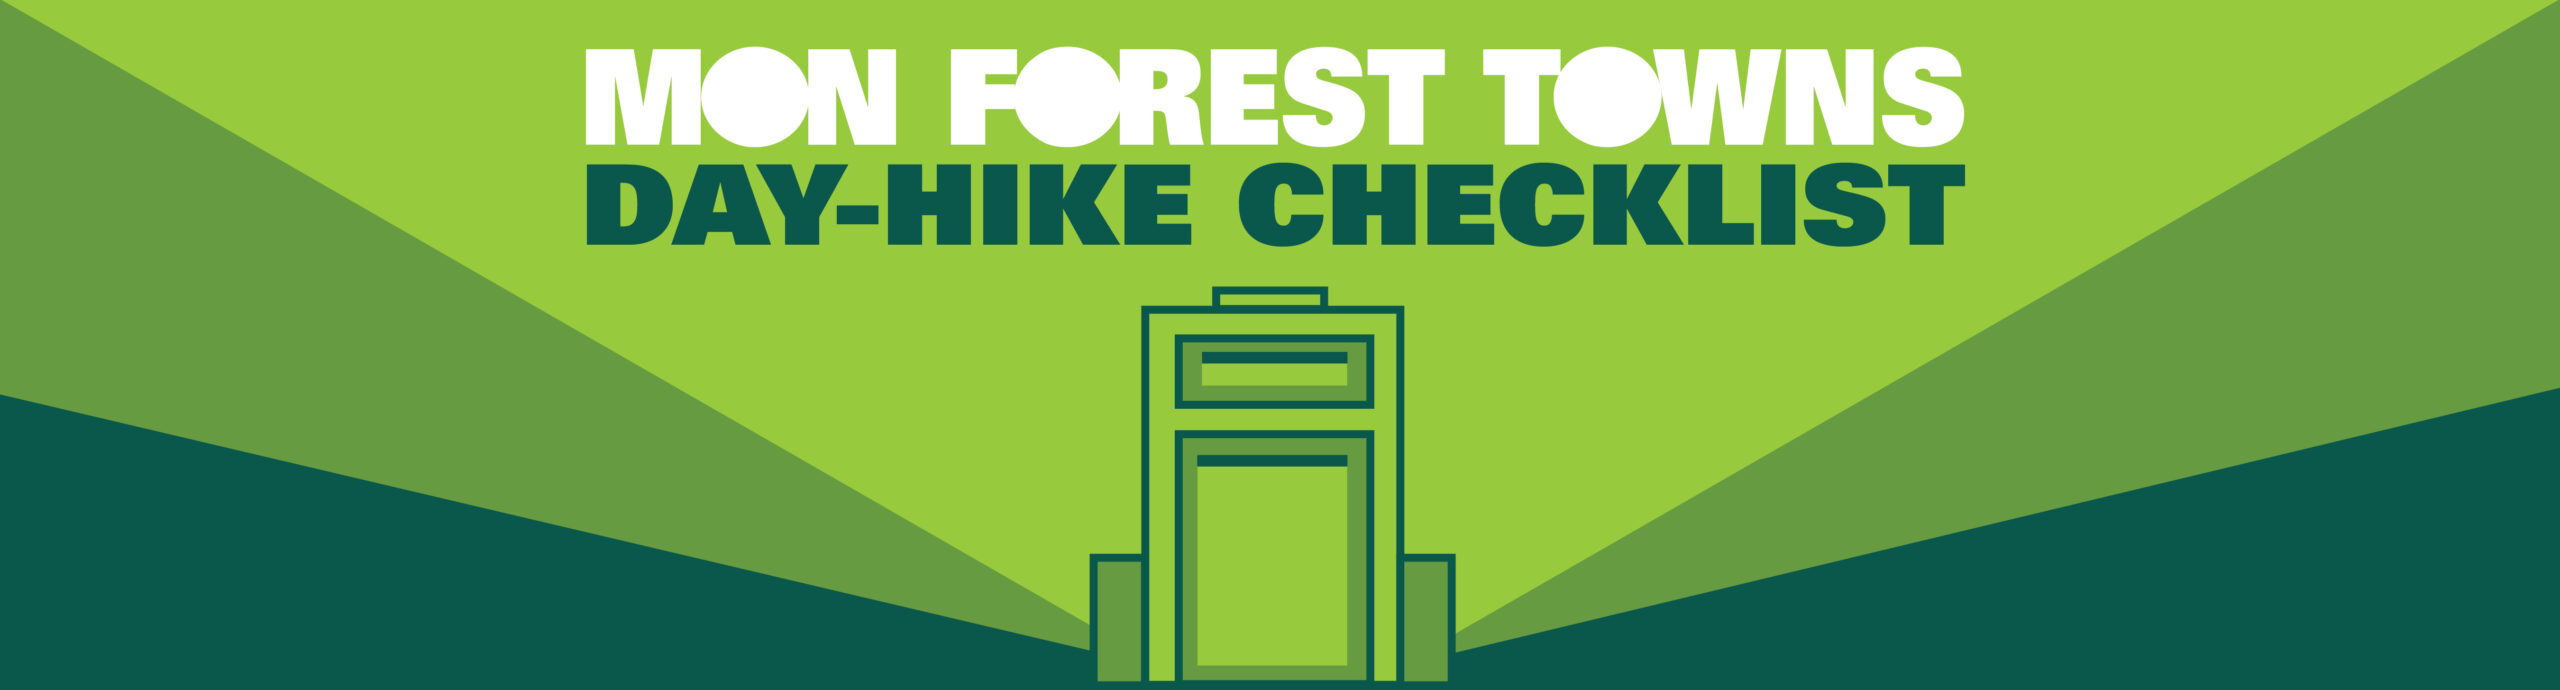 Mon Towns Day Hike Checklist Graphic